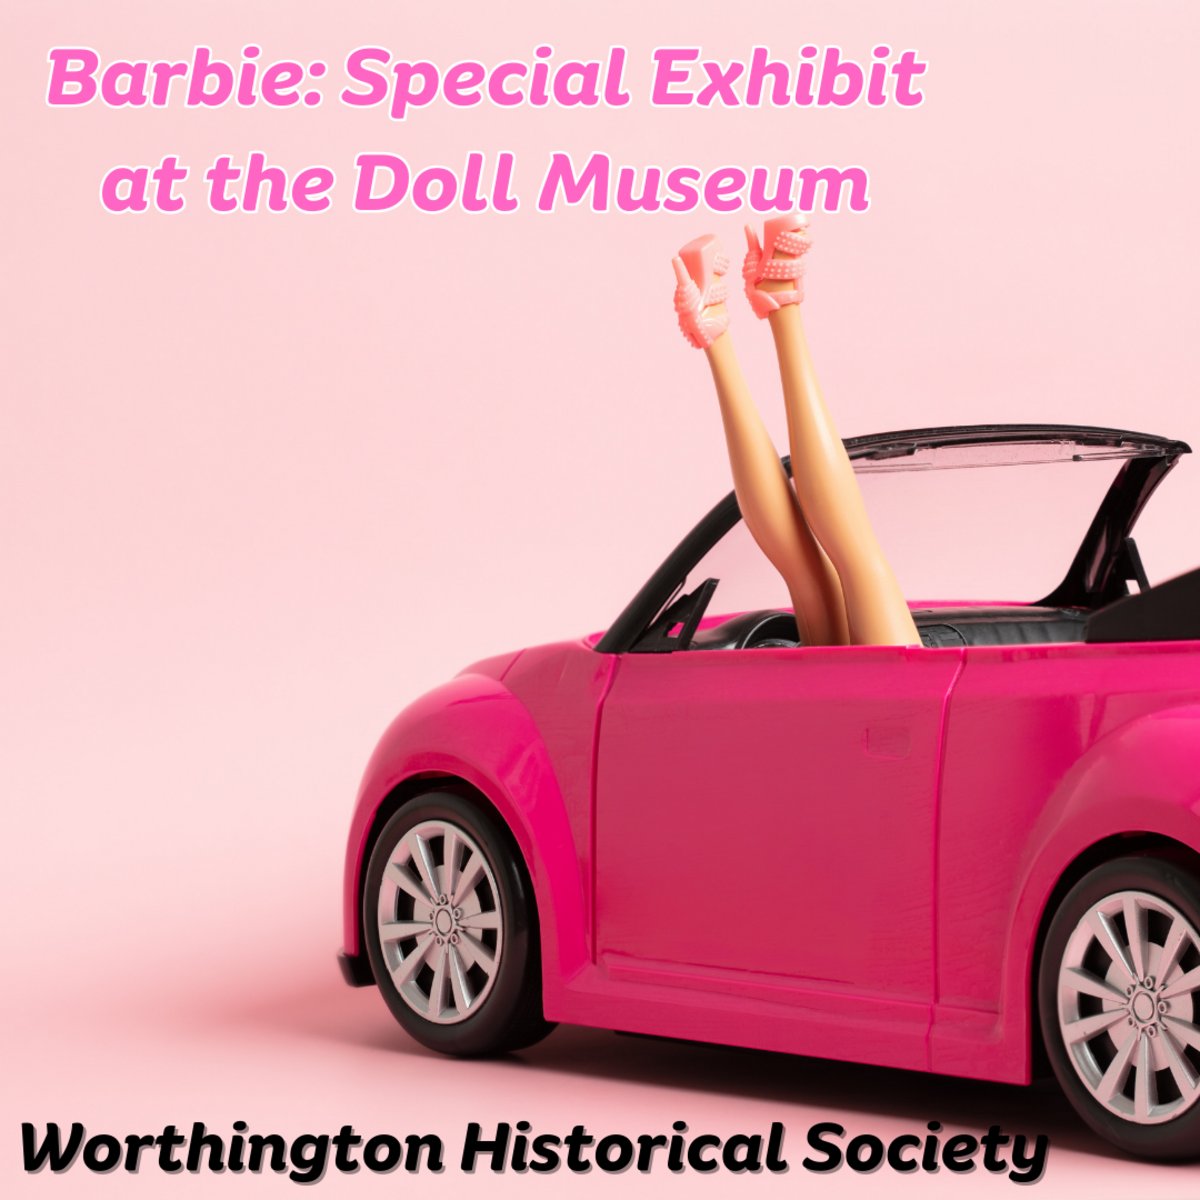 Do you have a newfound love for #Barbie, especially since the #Barbiemovie? See the fantastic Barbie exhibit at Worthington Historical Society! You'll love exploring Barbie's many careers, iconic outfits, adventures, and accessories. More info at bit.ly/44ziBqM